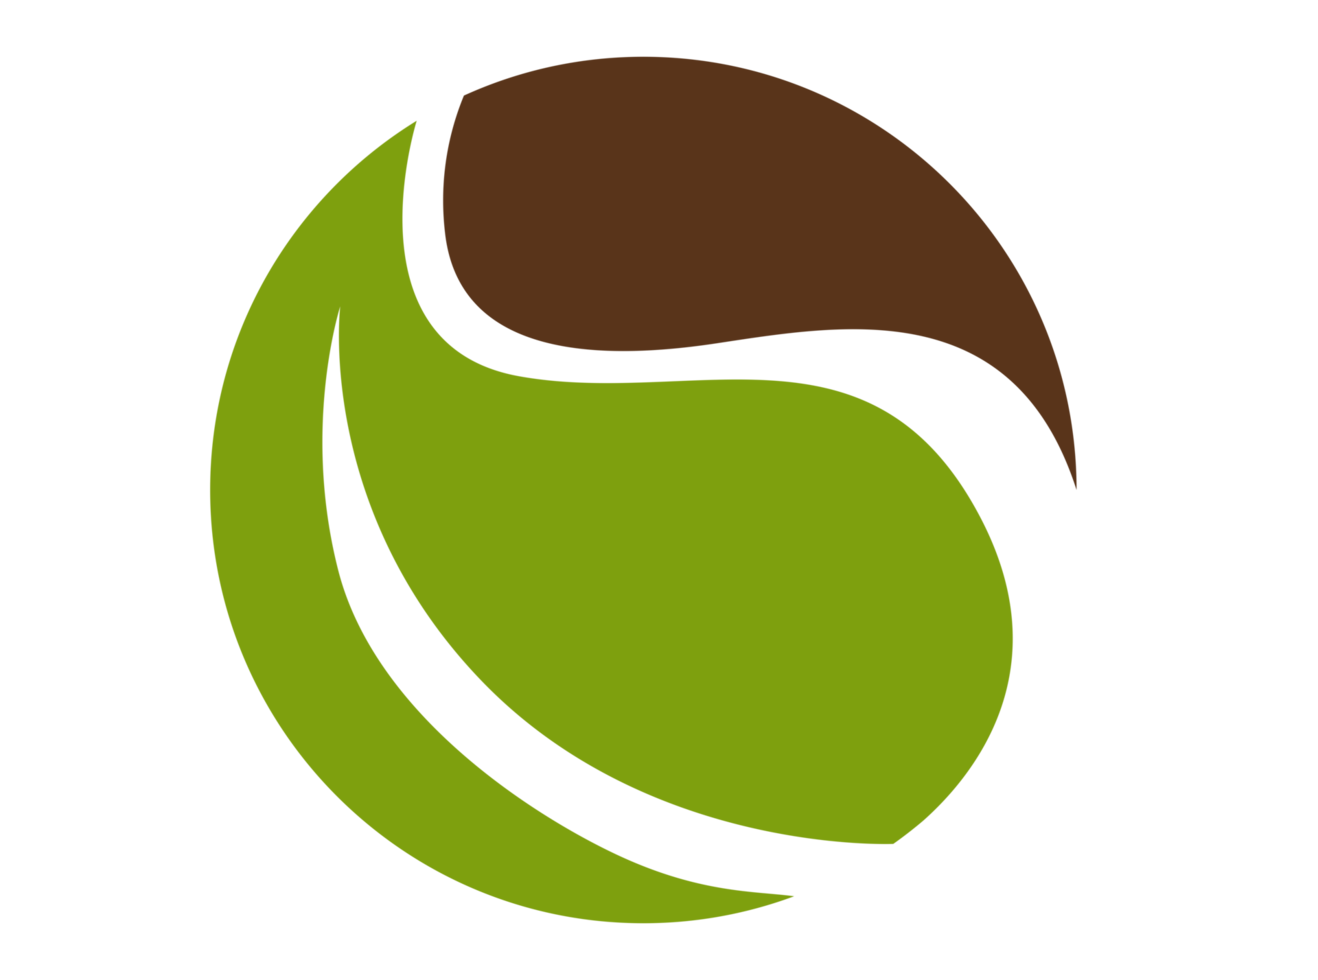 chocolate and Green Tea logo icon png